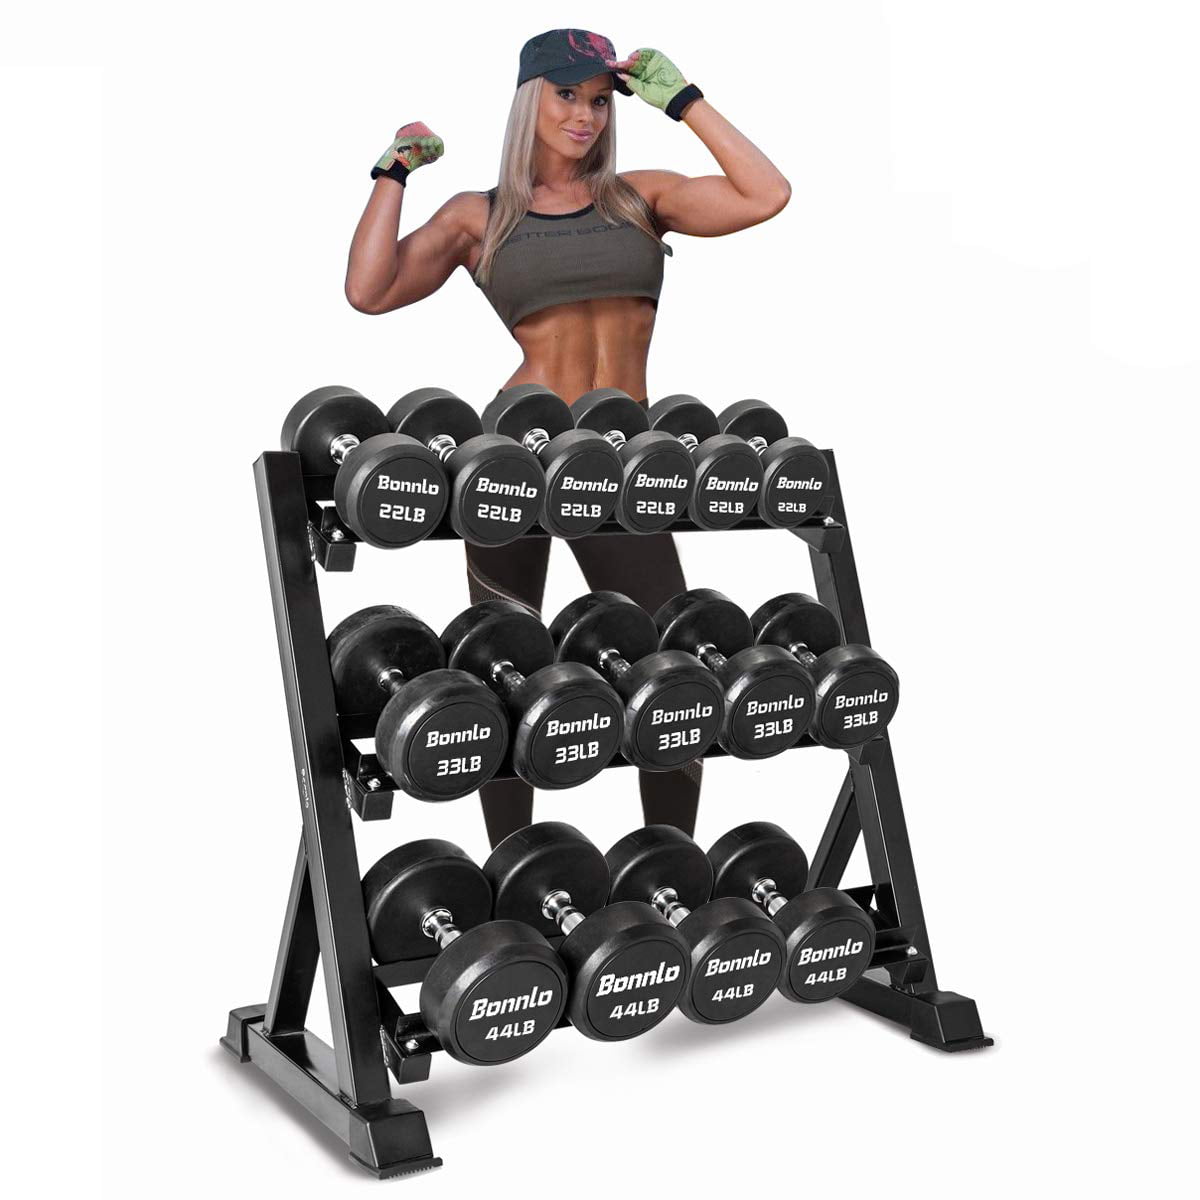 3-Tier Dumbbell Weight Lifting Racks Stand Tree Fitness Dumbell Holder Storage 